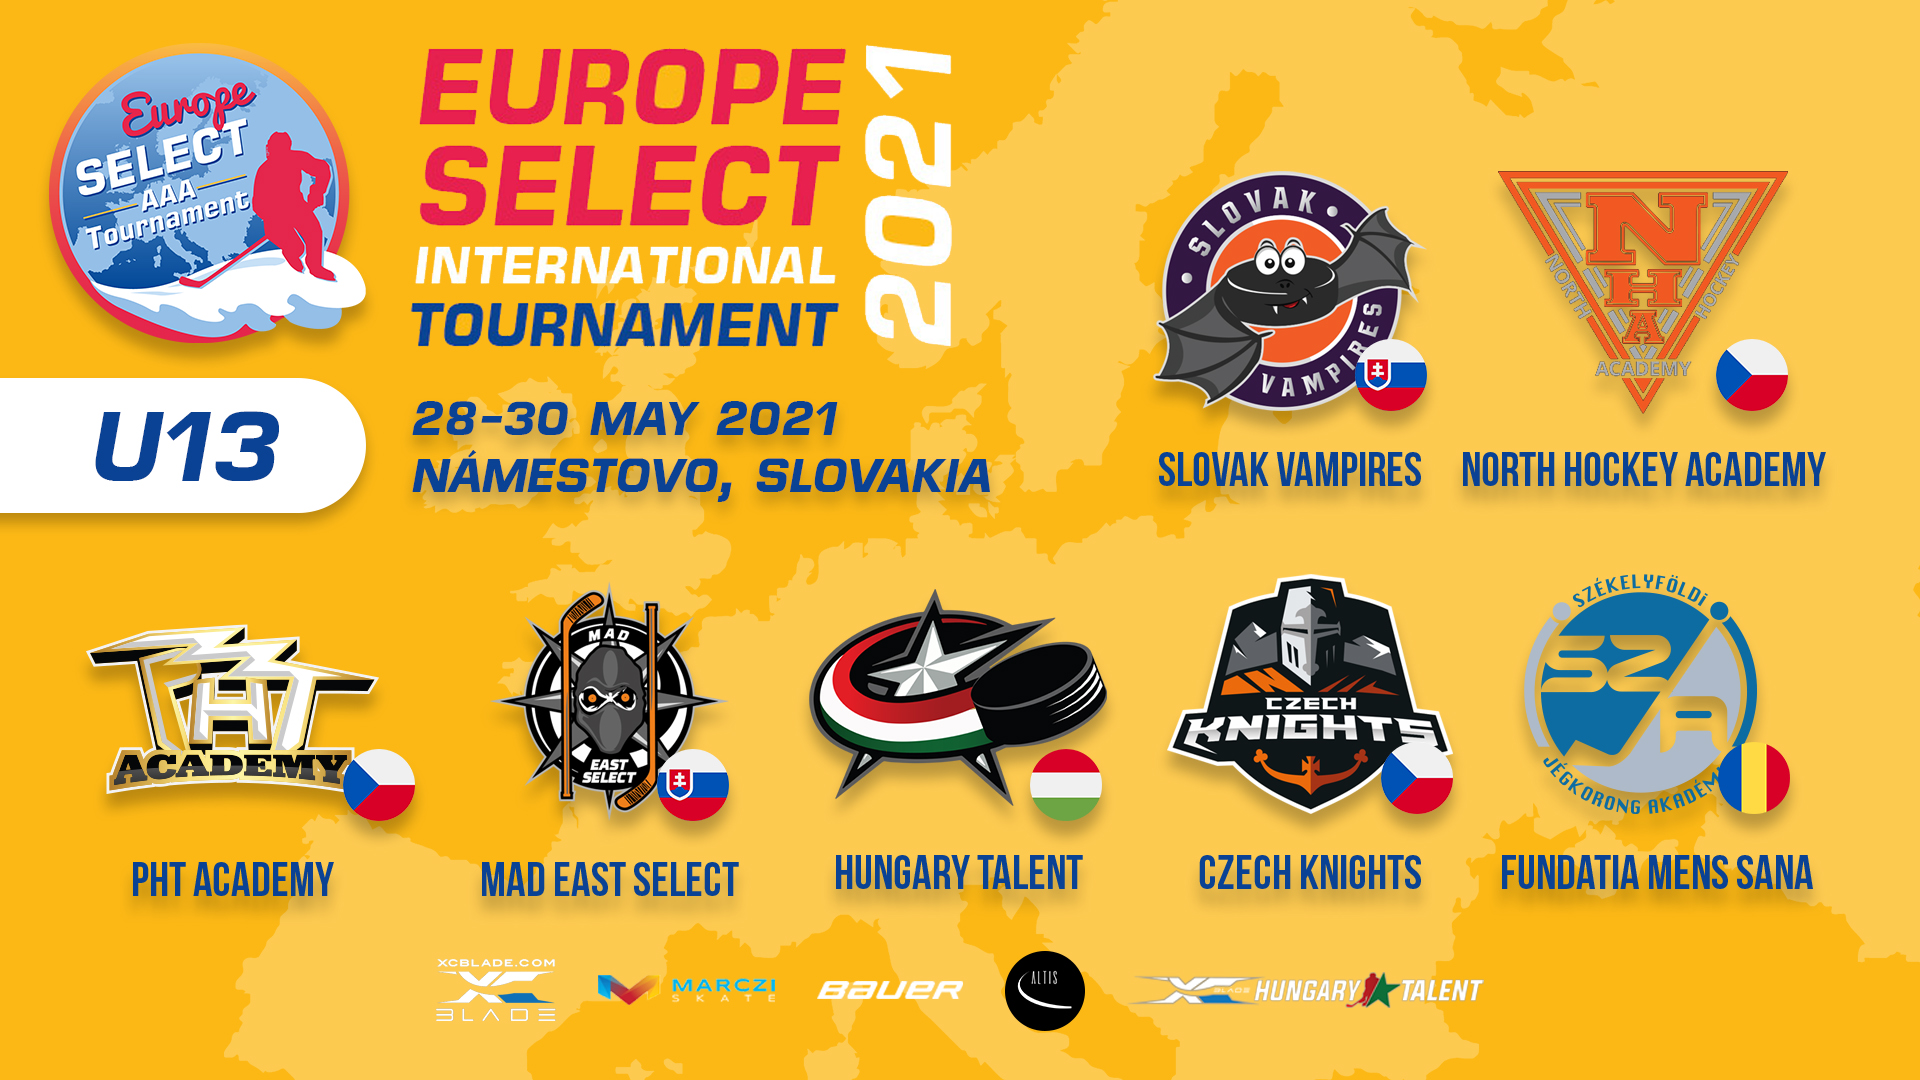 2009ers will also join the Europe Select Tournament